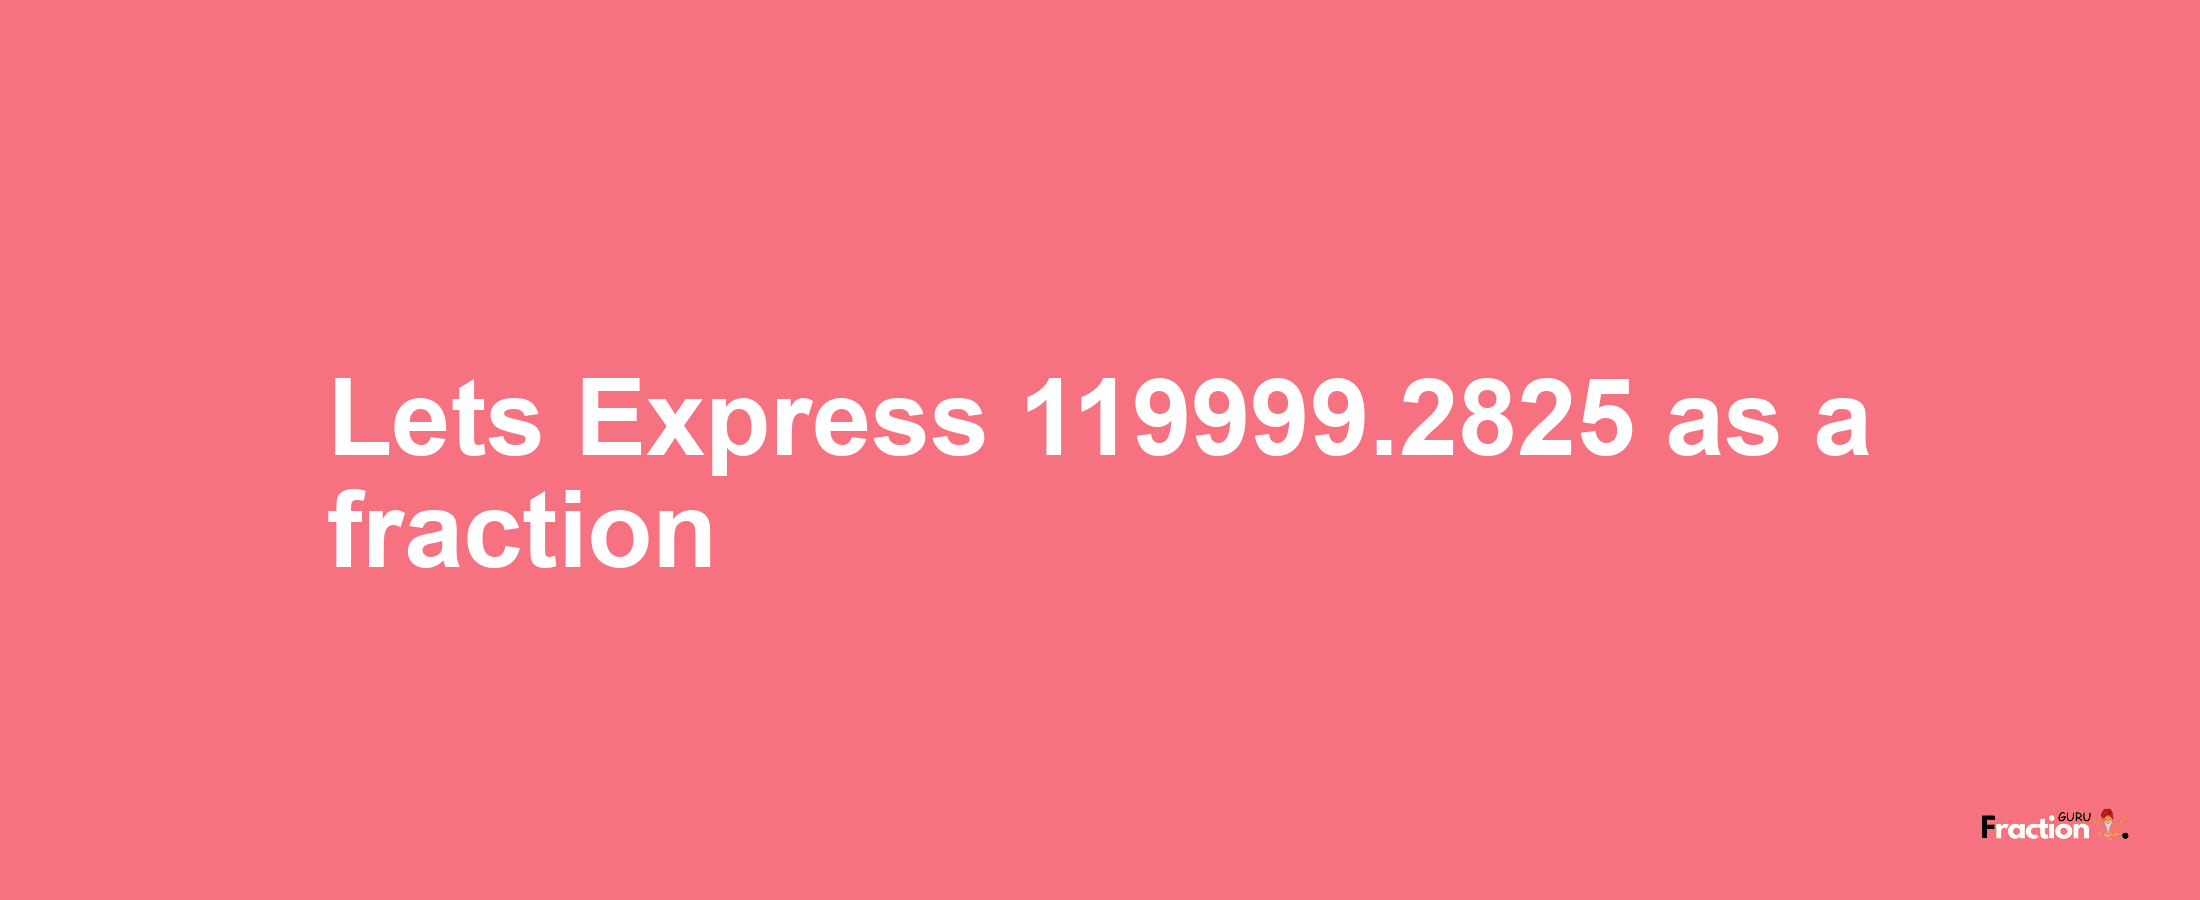 Lets Express 119999.2825 as afraction